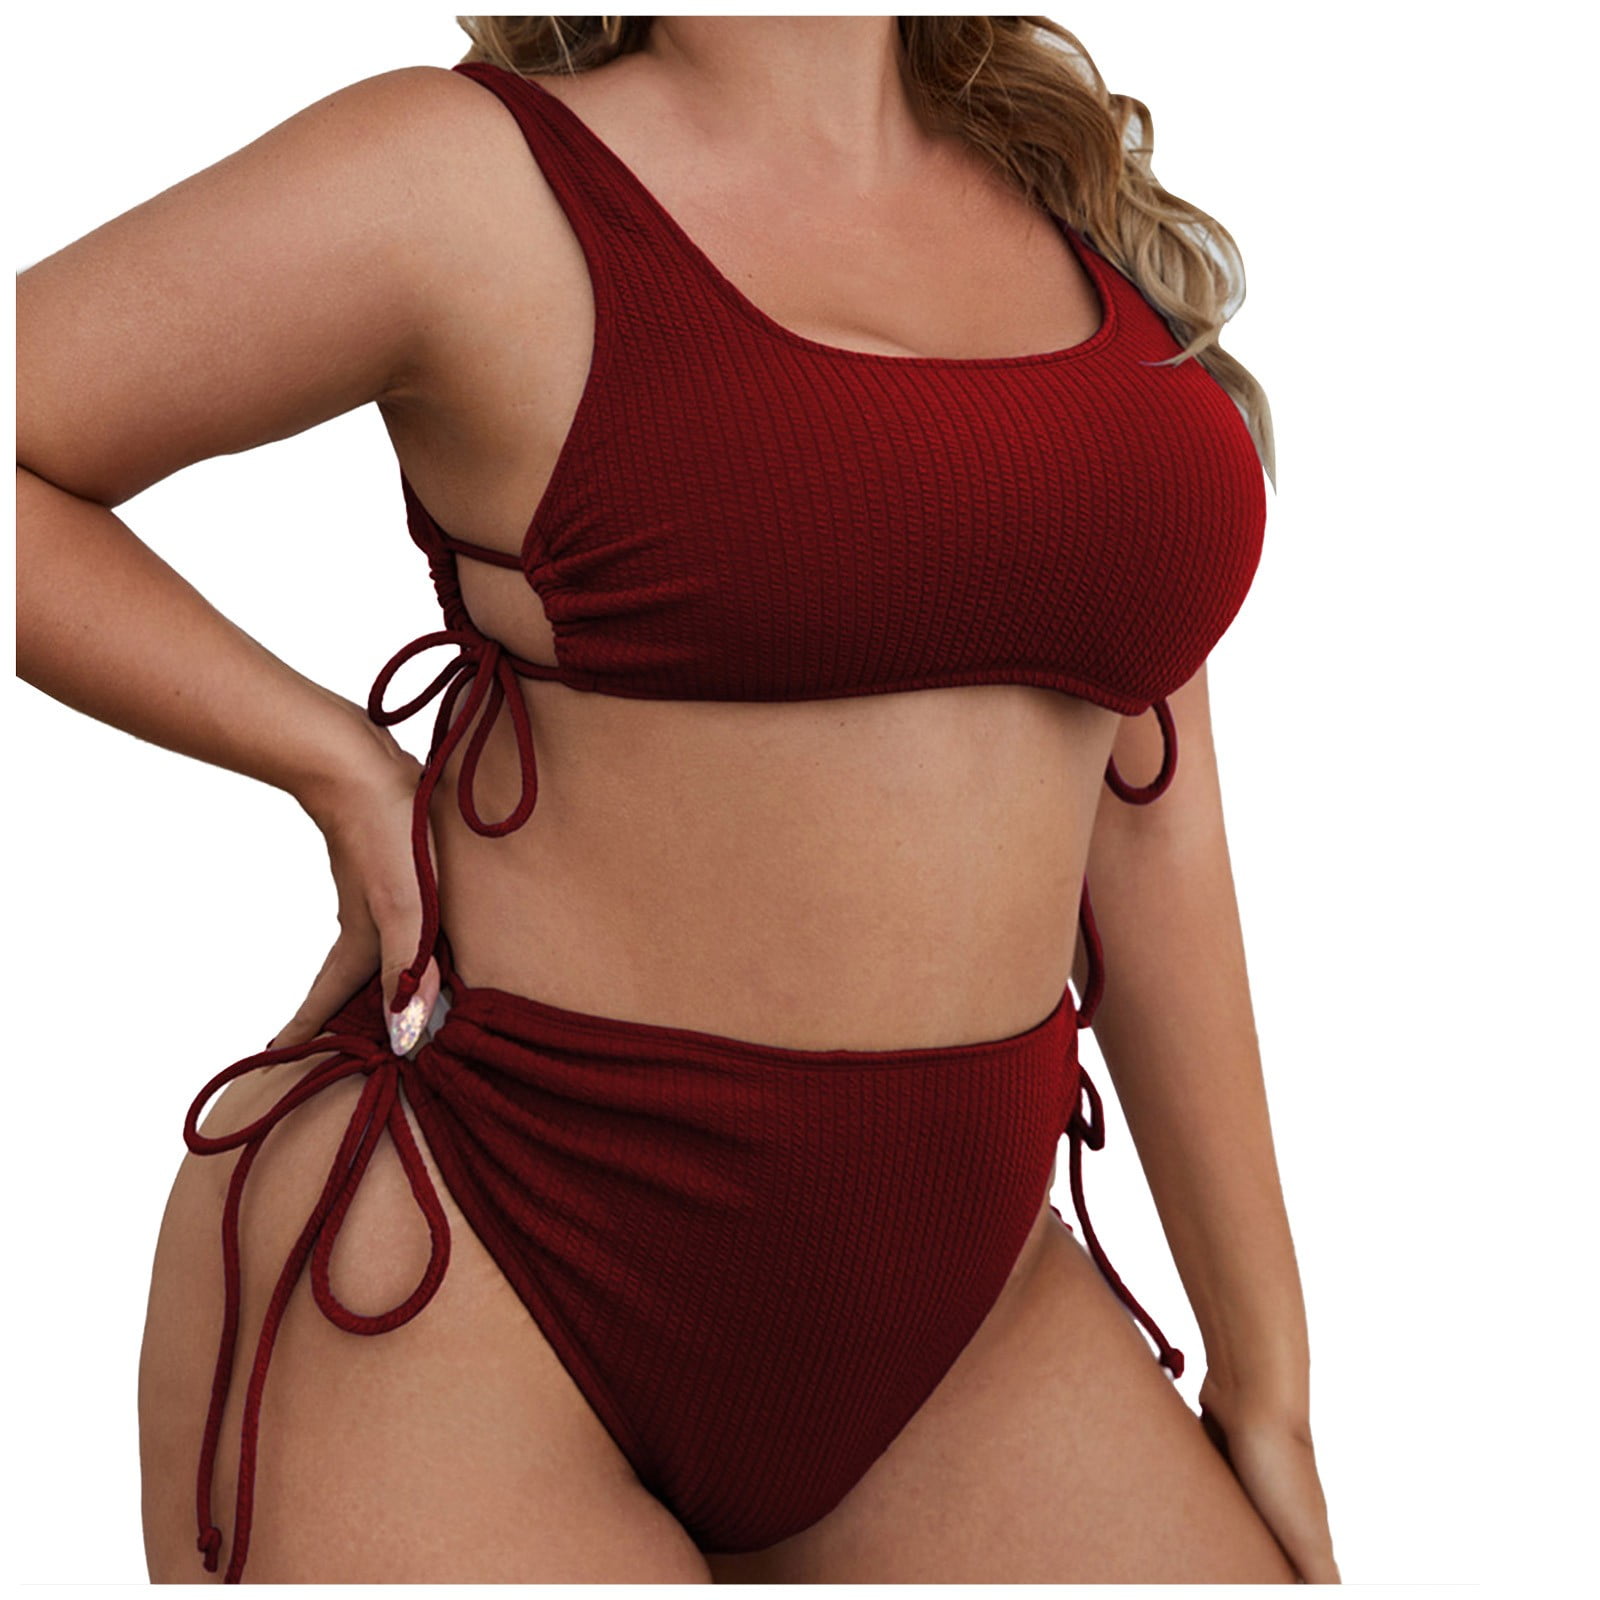 Mamu - BODY SHAPER👙 PRICE;55,000 SIZE;S,M,L,XL,XXL,3XL Kindly contact  us;+255 692 003 353 Location;makumbusho bus stand YES WE DELIVERY DOOR TO  DOOR❤️ #trustusyouwontregret